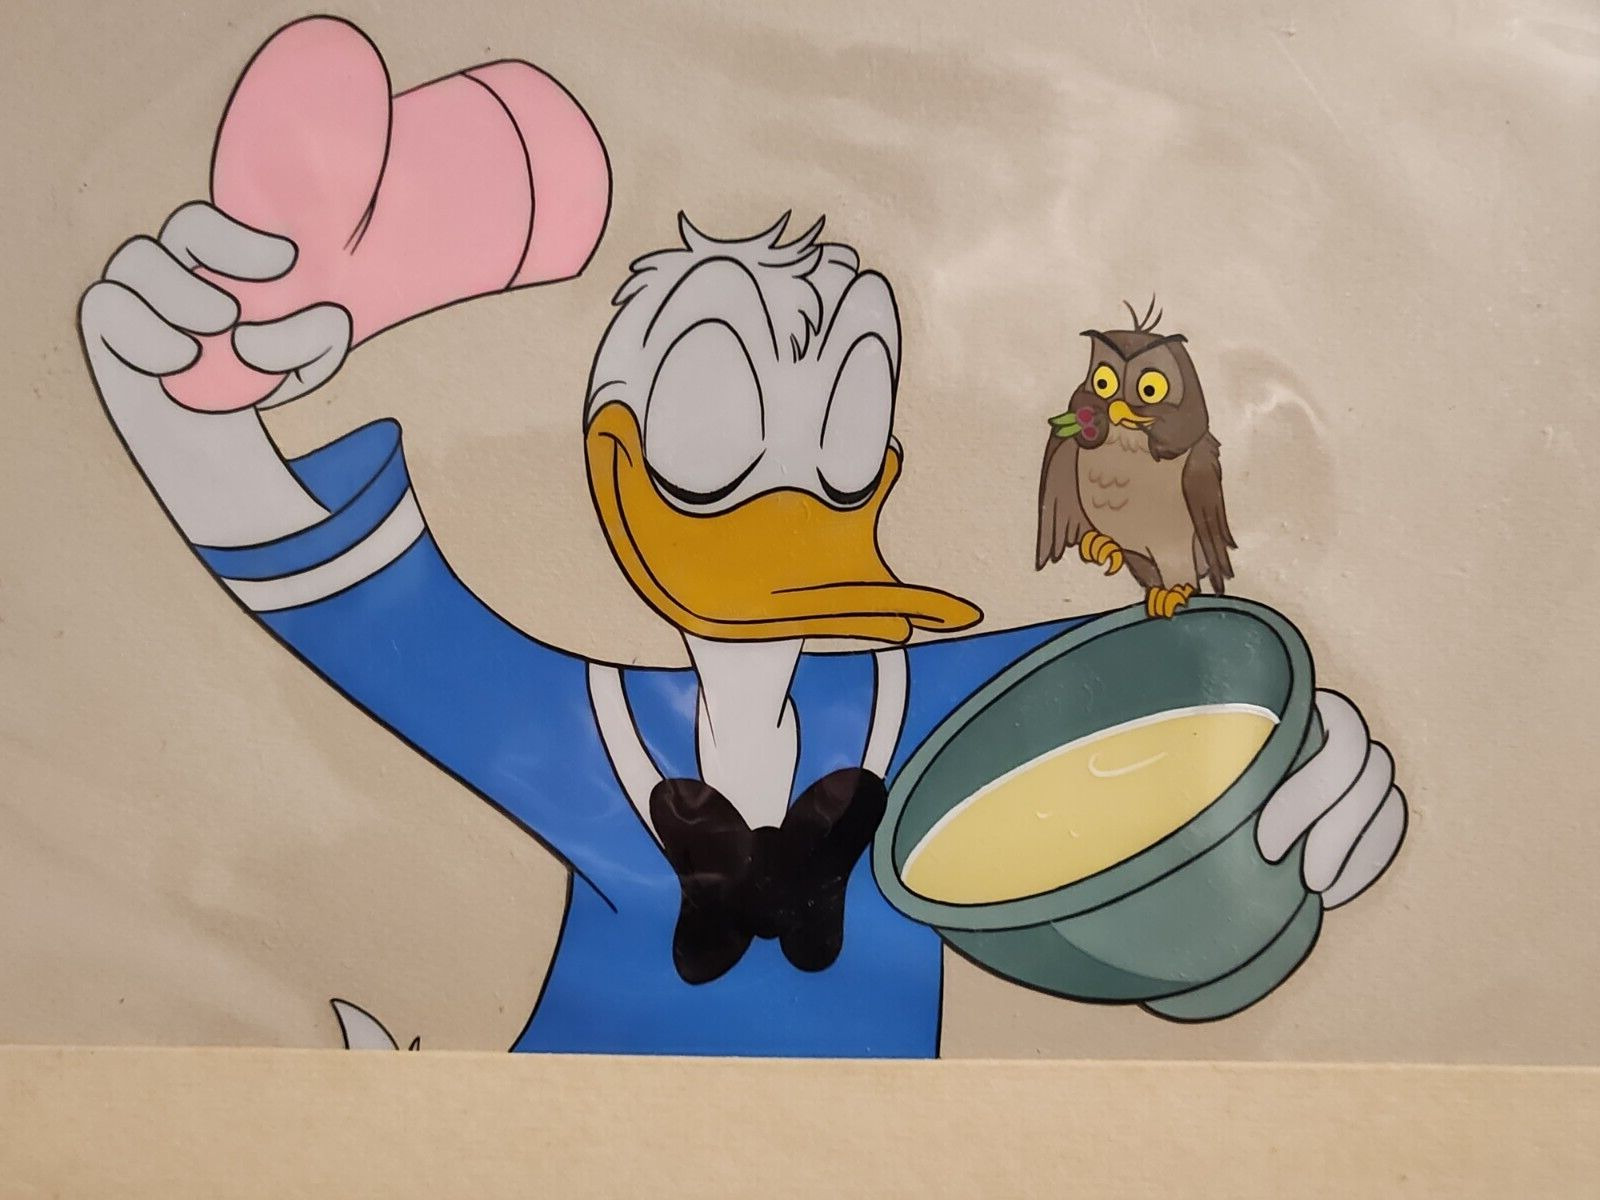 1950s DONALD DUCK WISE OWL ORIGINAL HAND PAINTED PRODUCTION CELLULOID DRAWING